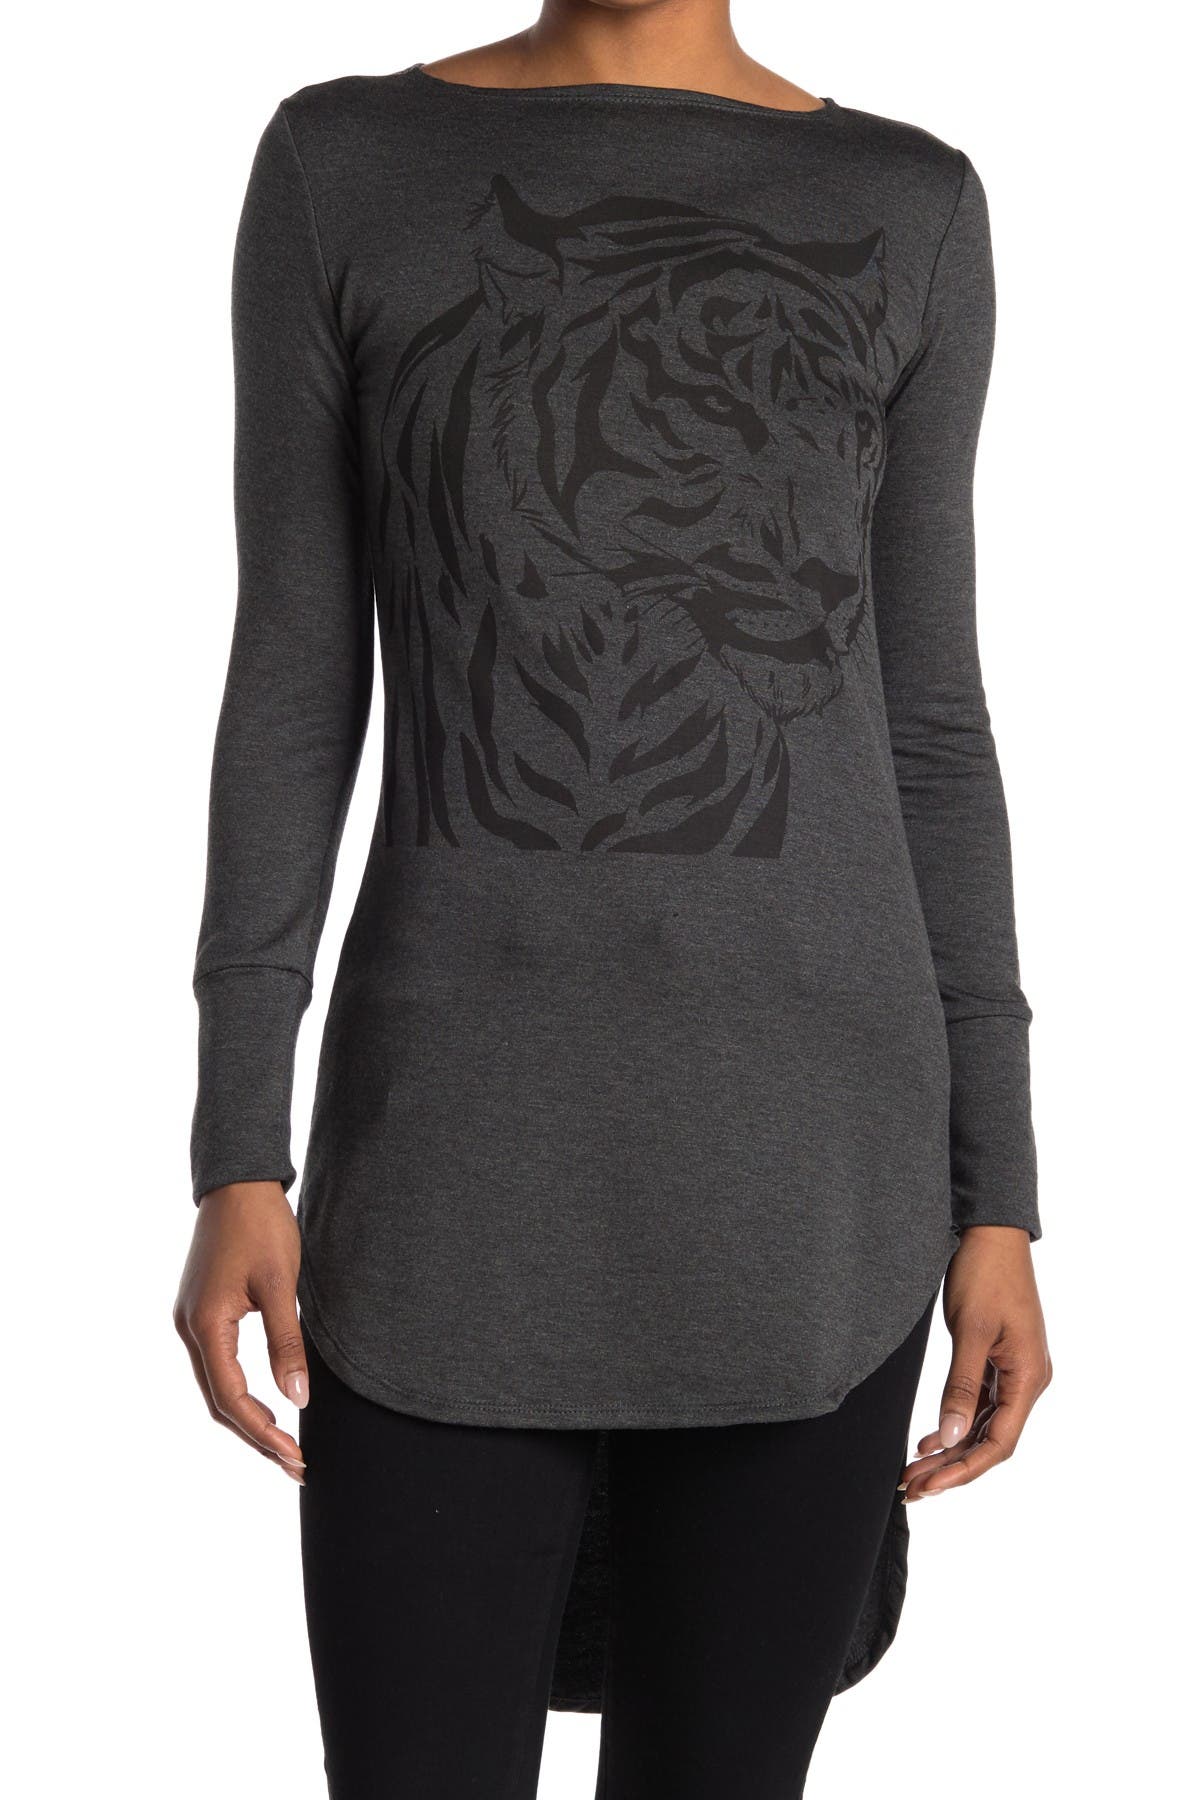 Go Couture Graphic Boatneck Top In Dark Grey